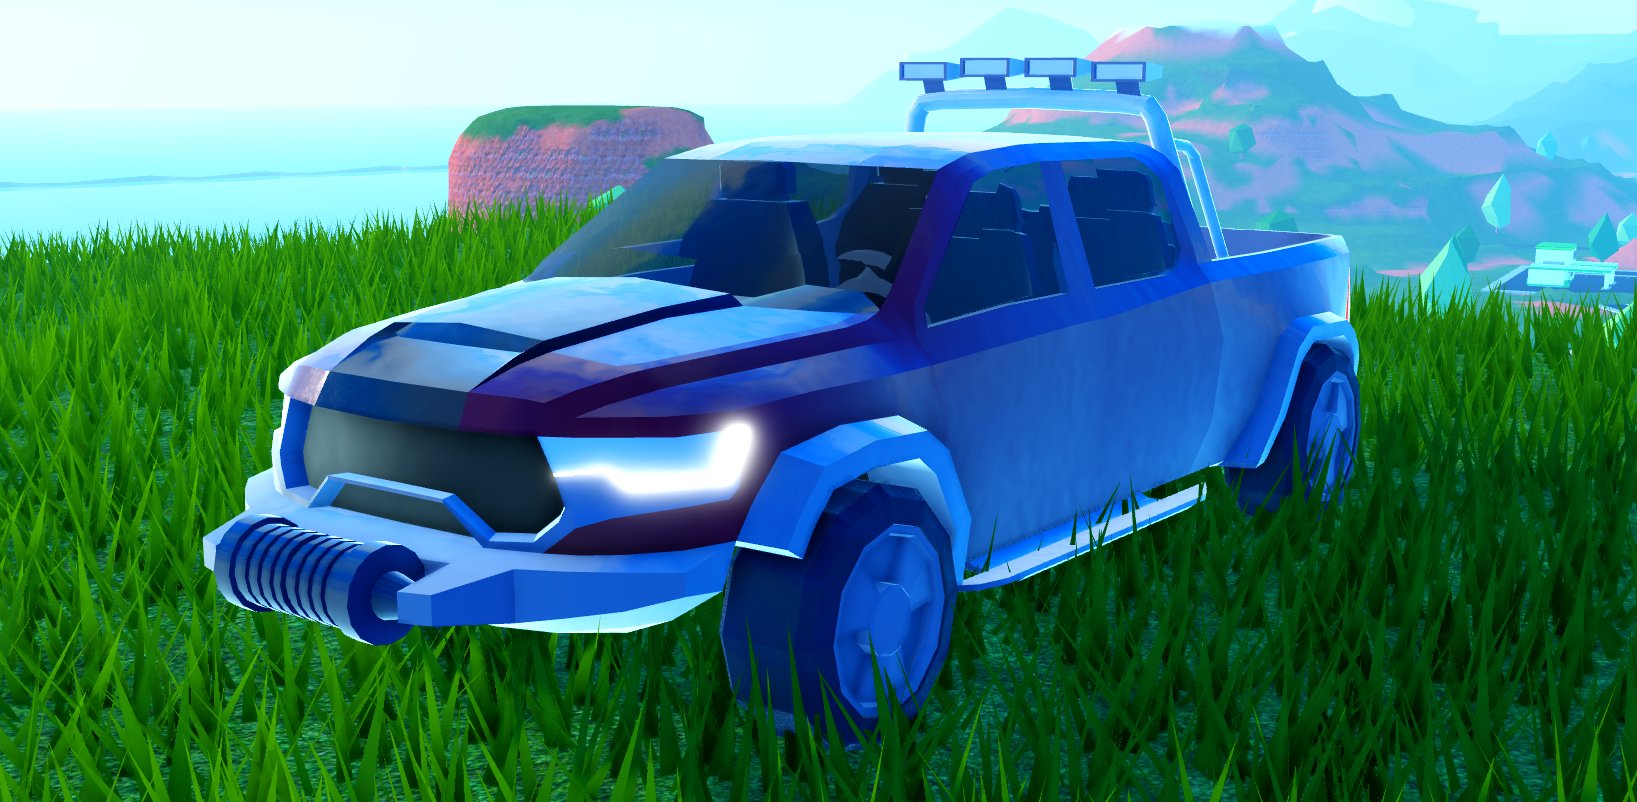 Rallysubbie On Twitter The General My Finest Piece Of Creation So Far In The Offroad Scene This Is A Submission For Season 4 Grand Prize Which Means If You Want This - roblox general texture